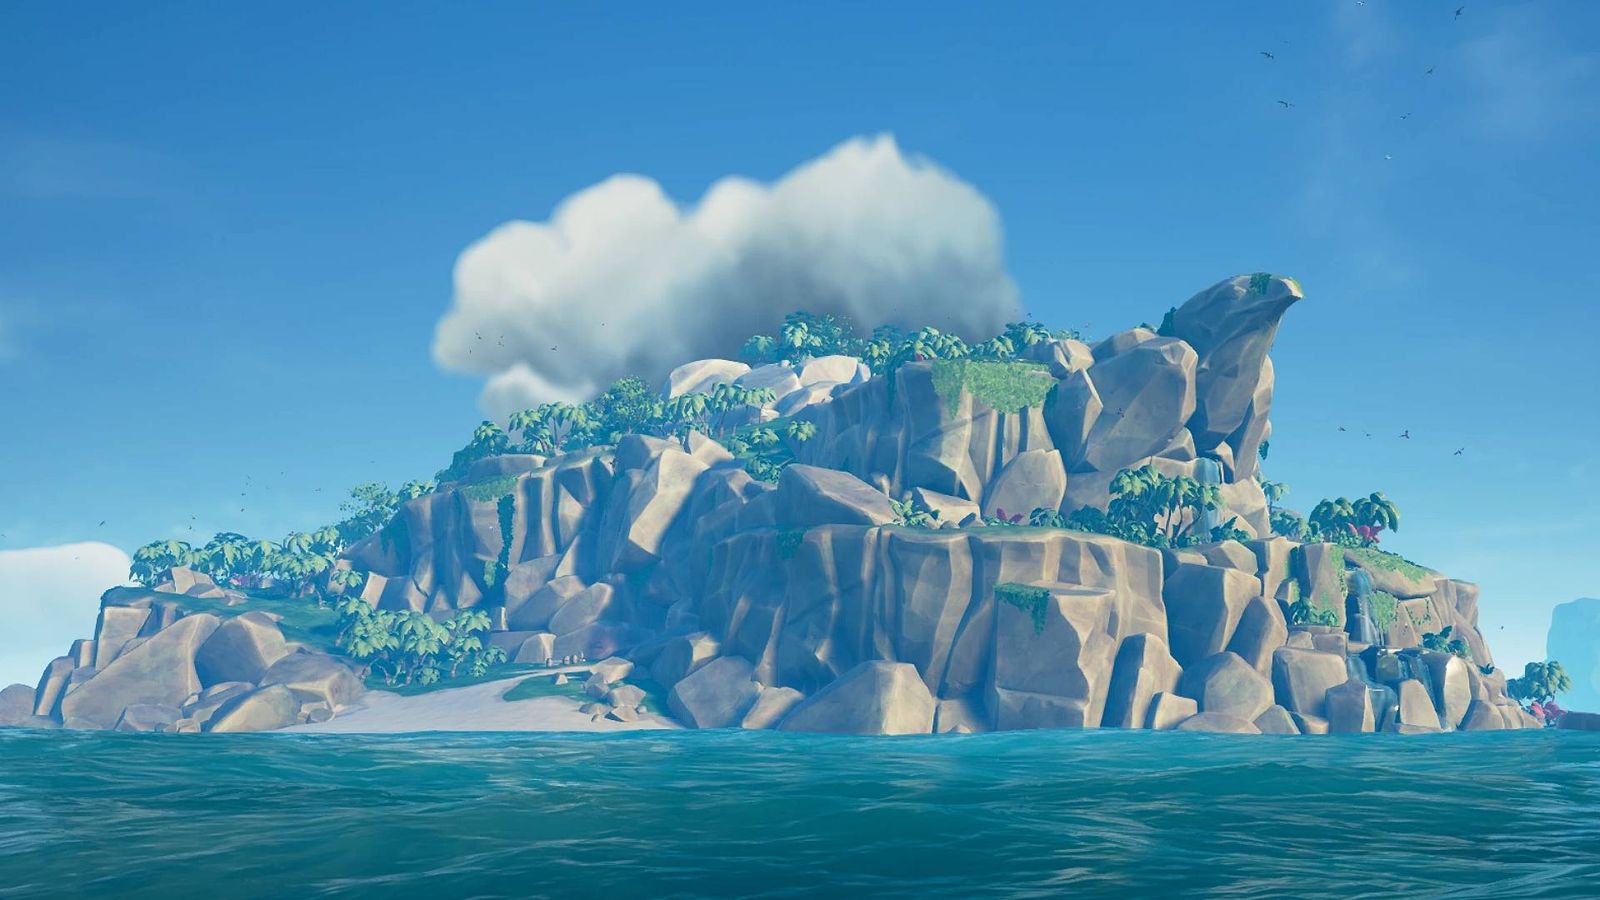 Plunder Valley in Sea of Thieves